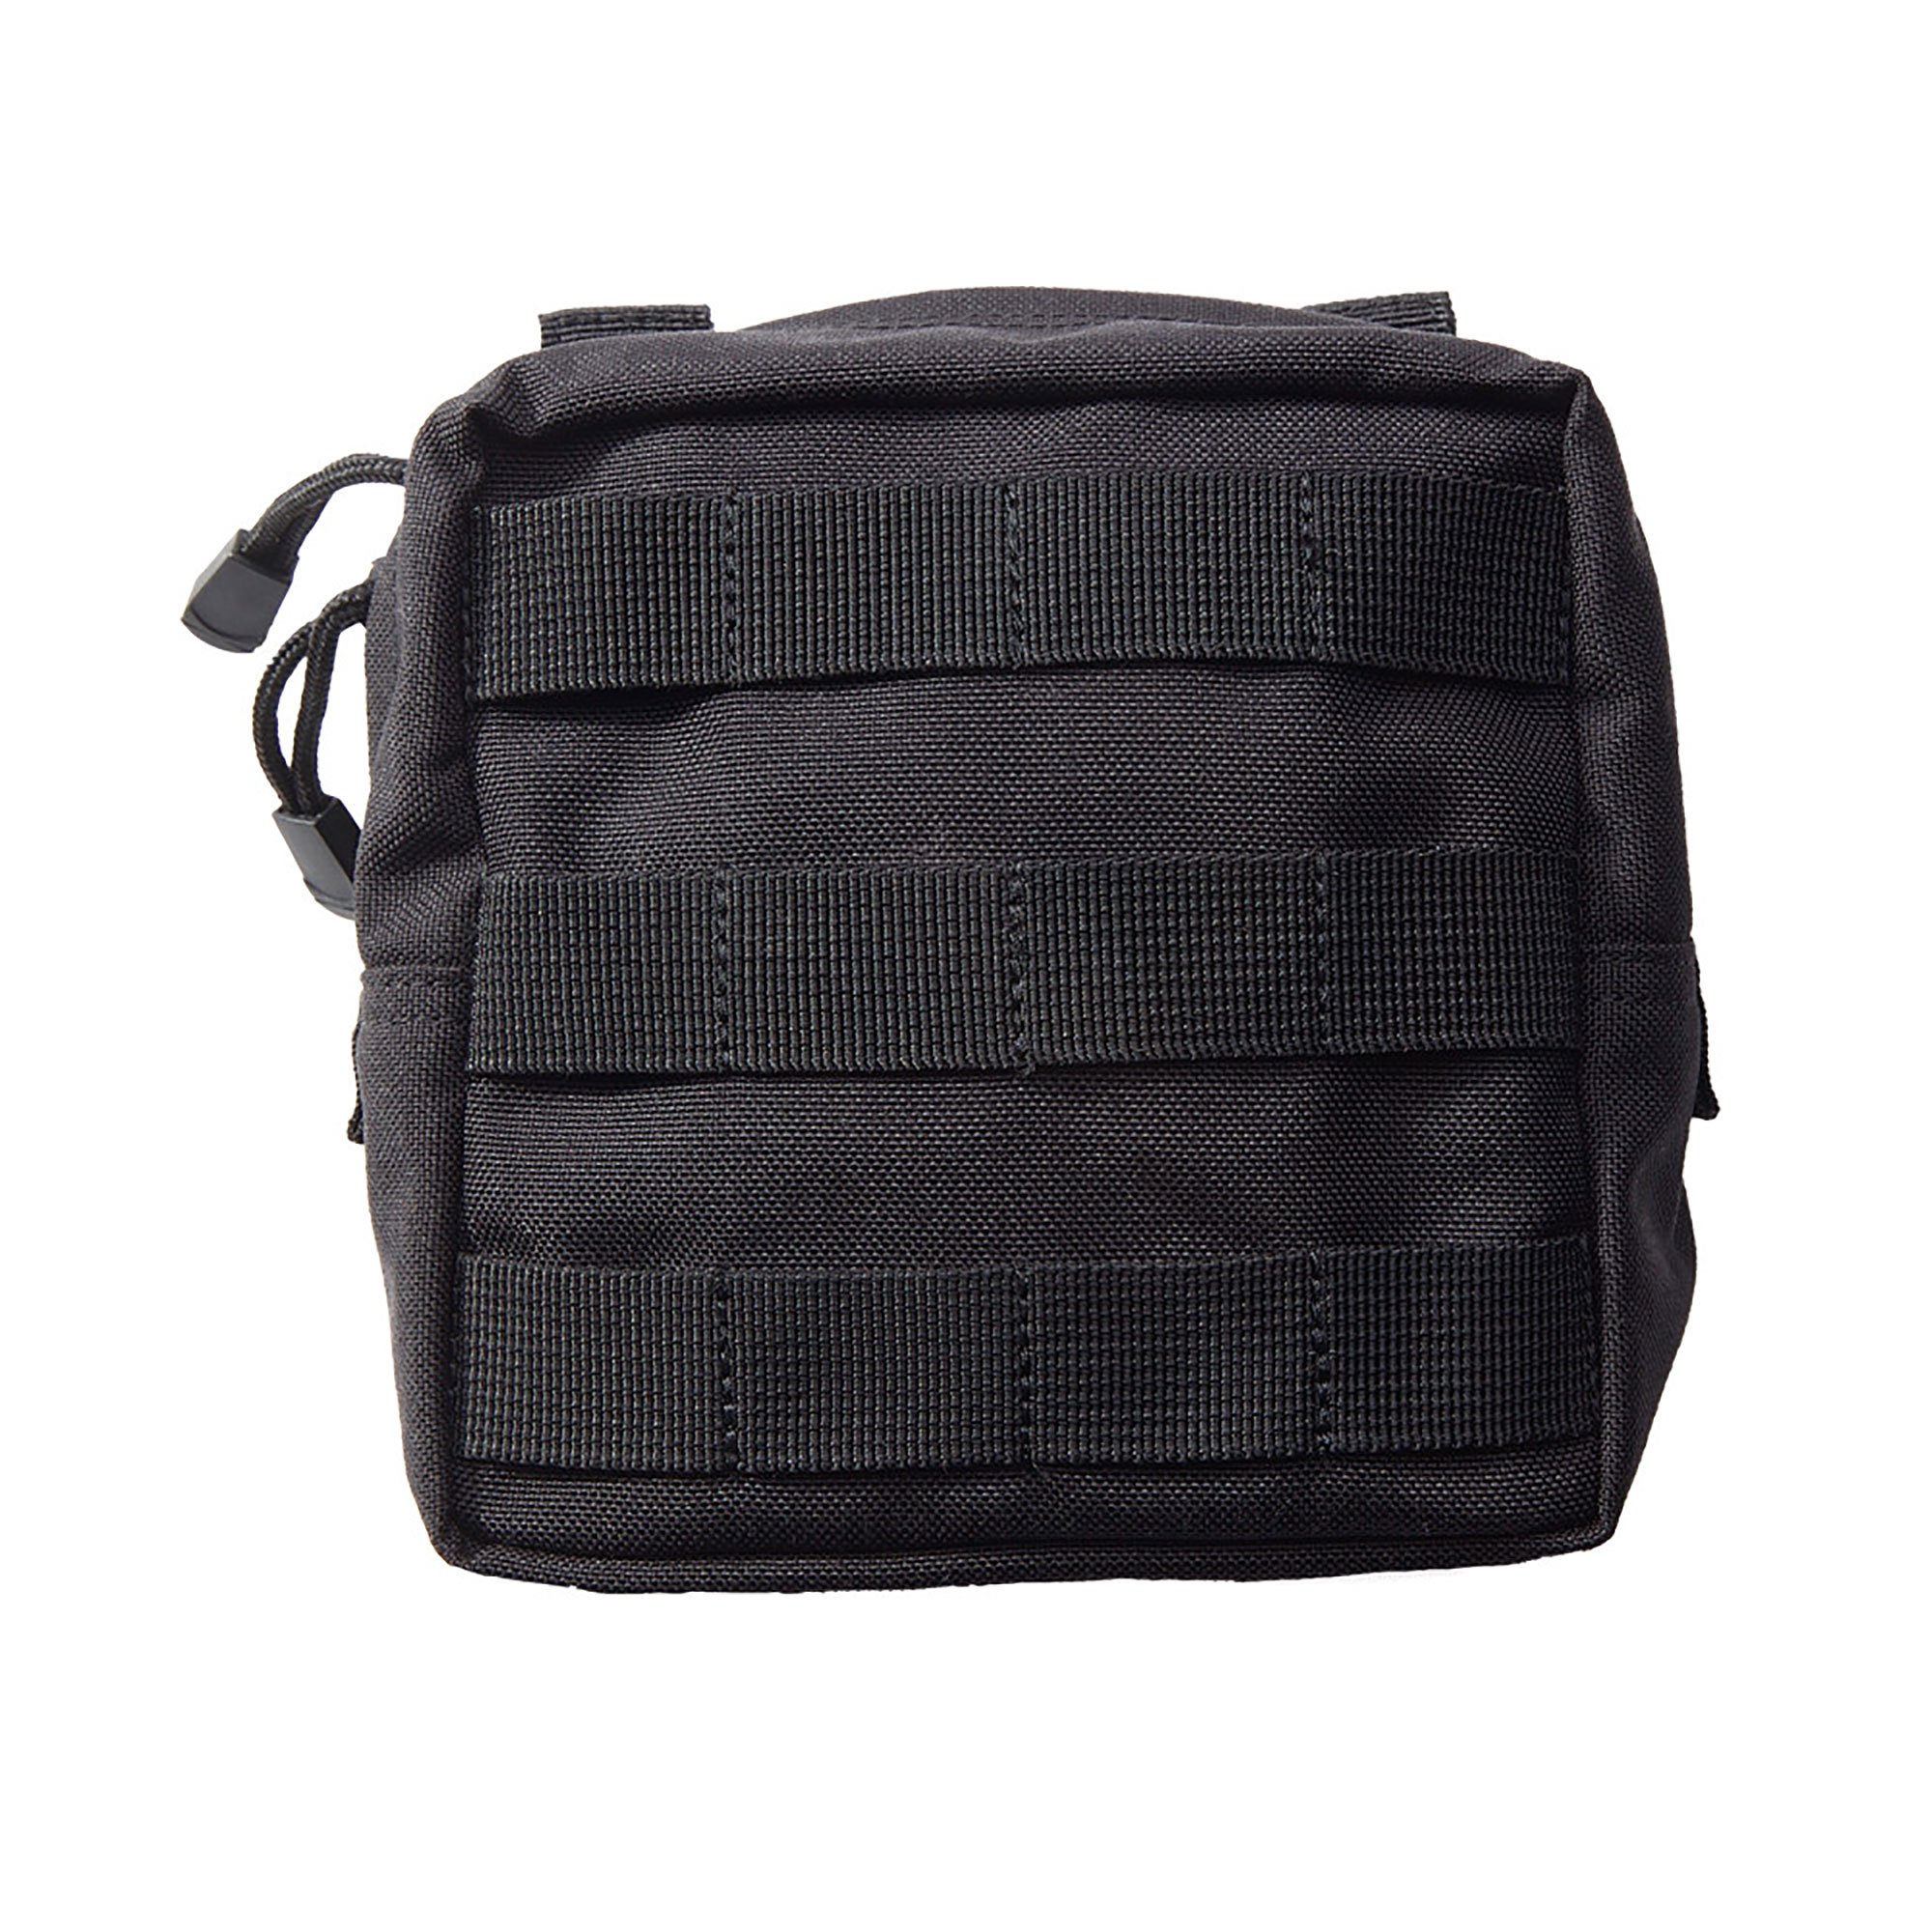 Mesh Pockets 5.11 Tactical 6 x 6 Medical Pouch Bag Nylon MOLLE Style 58715 